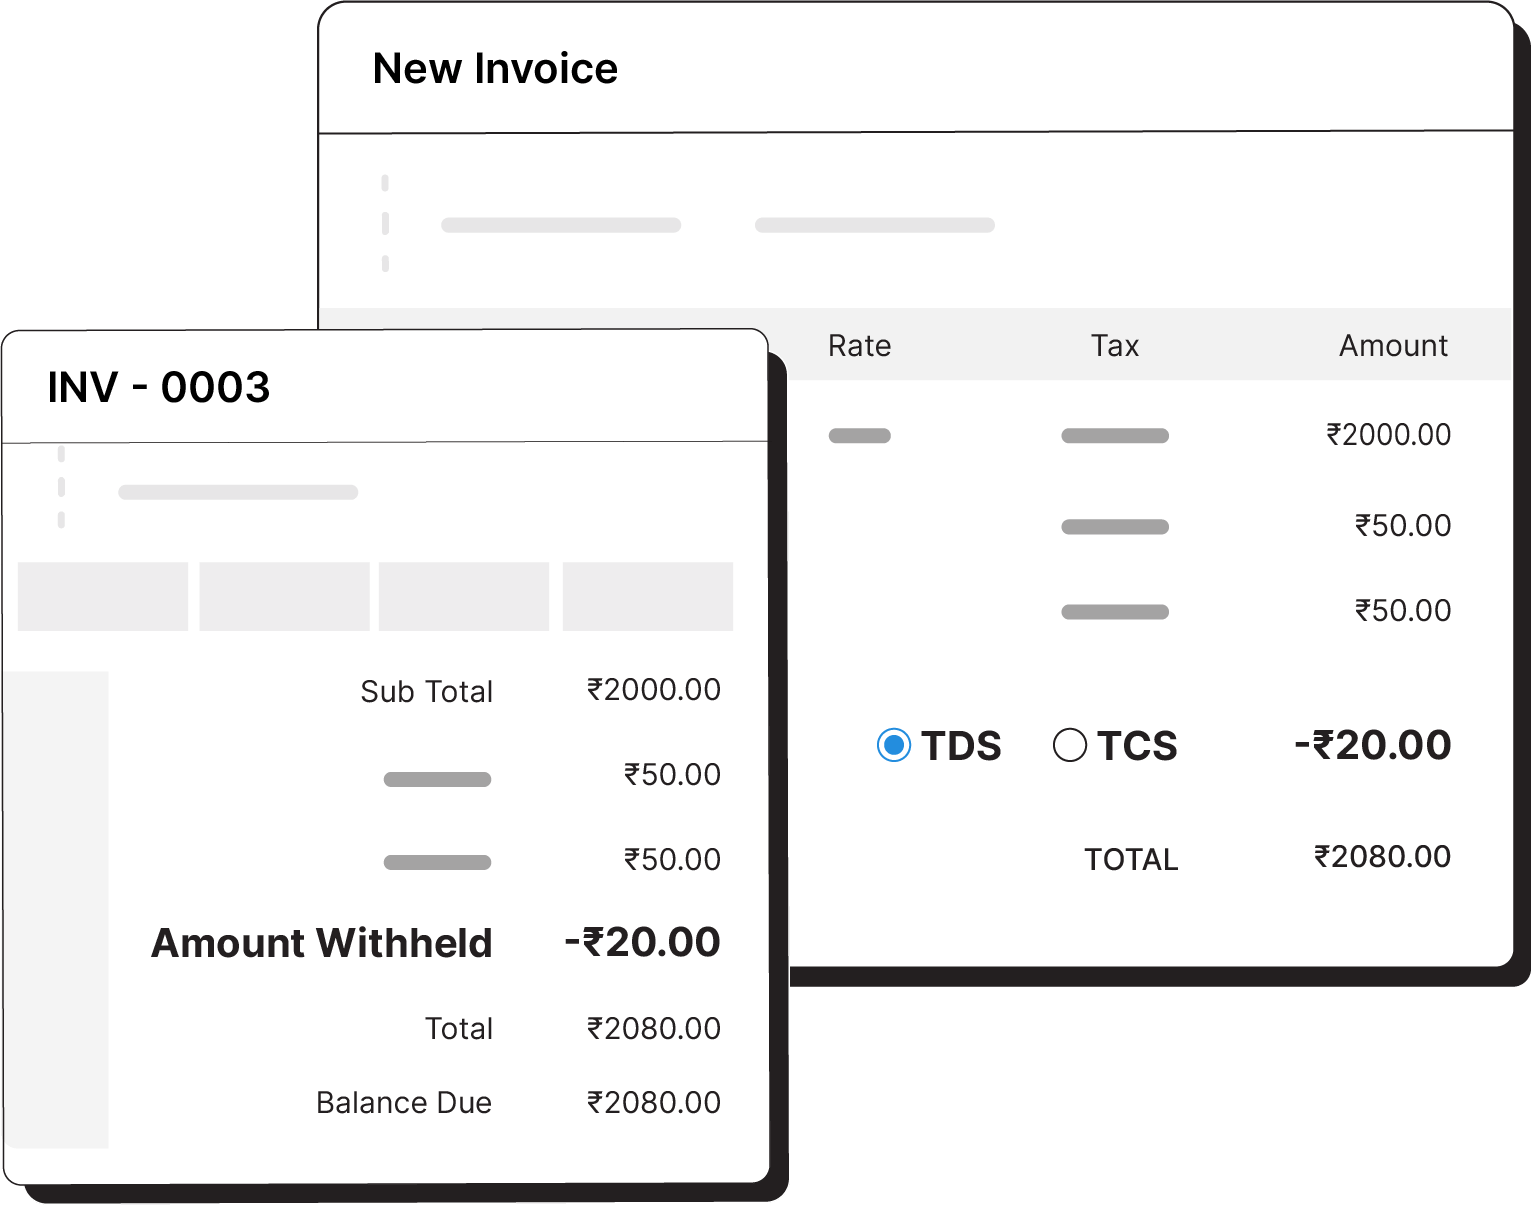 Apply TDS on invoices, bills of supply, or debit notes - India edition